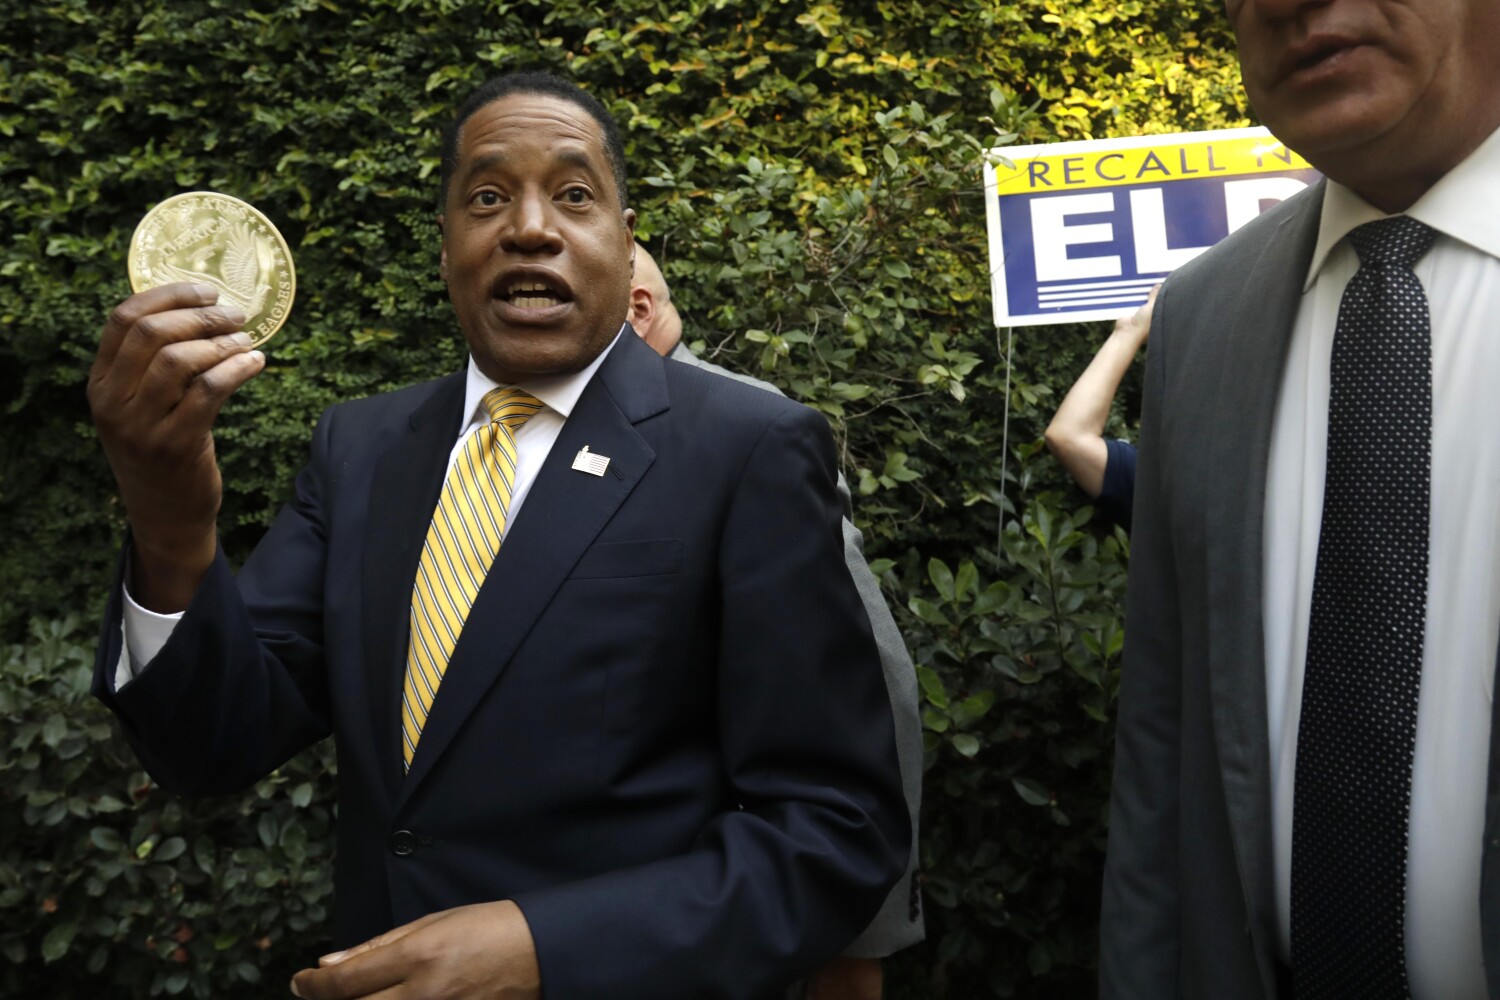 Larry Elder's private charity was a bust, and questions swirl over where the money went